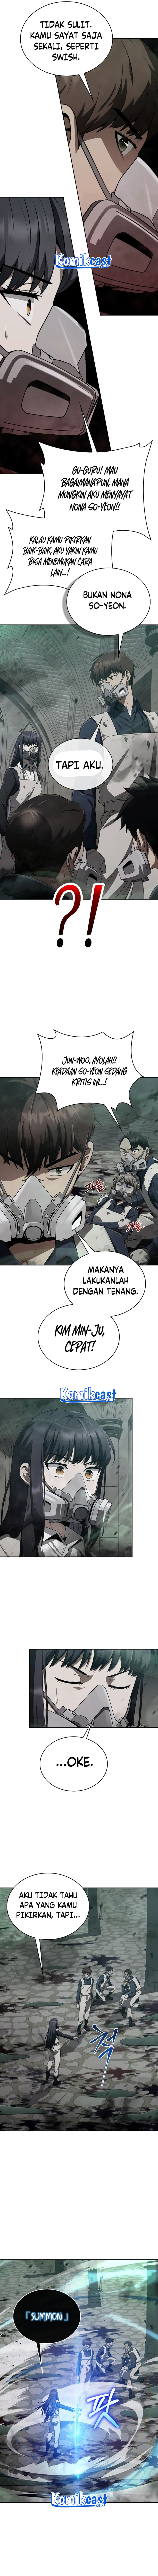 Dilarang COPAS - situs resmi www.mangacanblog.com - Komik clever cleaning life of the returned genius hunter 009 - chapter 9 10 Indonesia clever cleaning life of the returned genius hunter 009 - chapter 9 Terbaru 3|Baca Manga Komik Indonesia|Mangacan